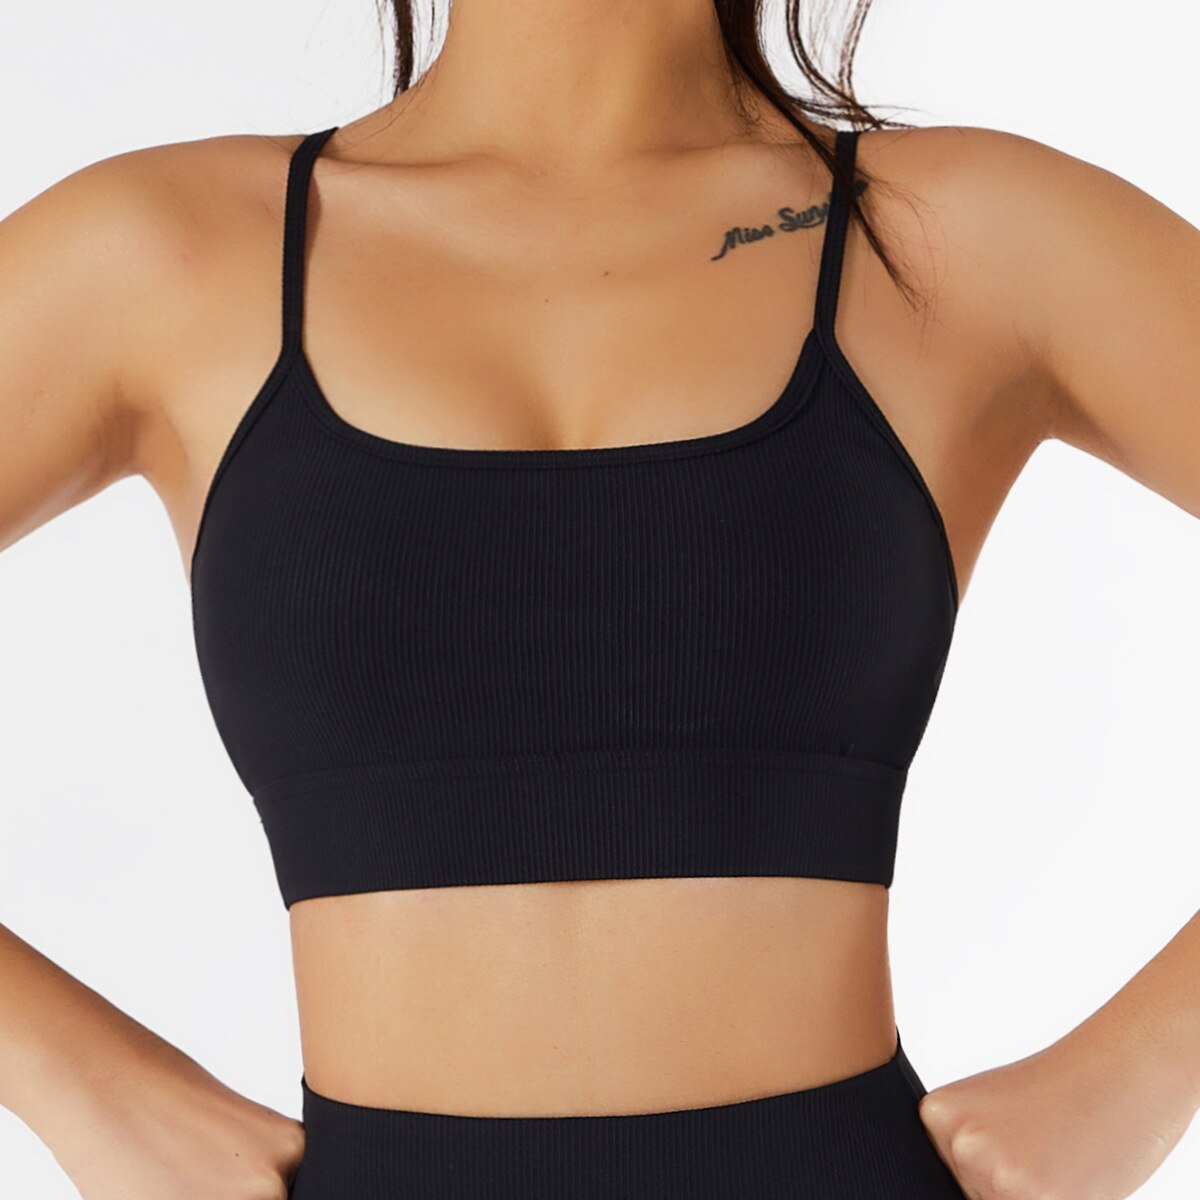 Women Seamless Yoga Bra Sexy Push Up Padded Sport Tops Fitness Elastic Breathable Nylon Tight Gym Crop Top Running Sportwear